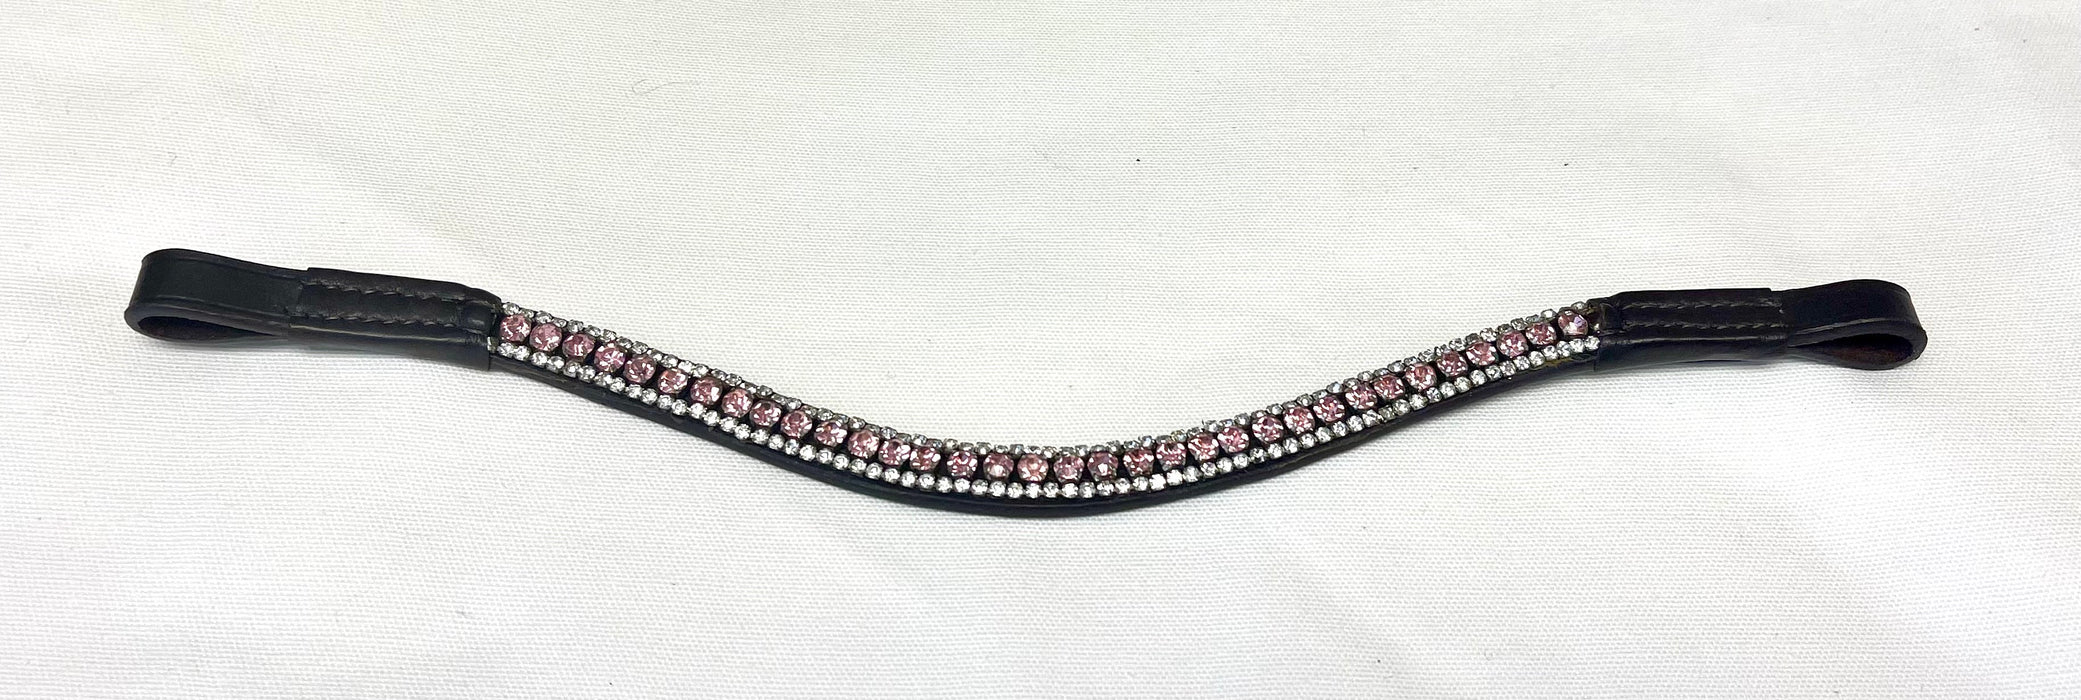 Curved Leather Browband w/Crystals - Pink/Clear Crystals